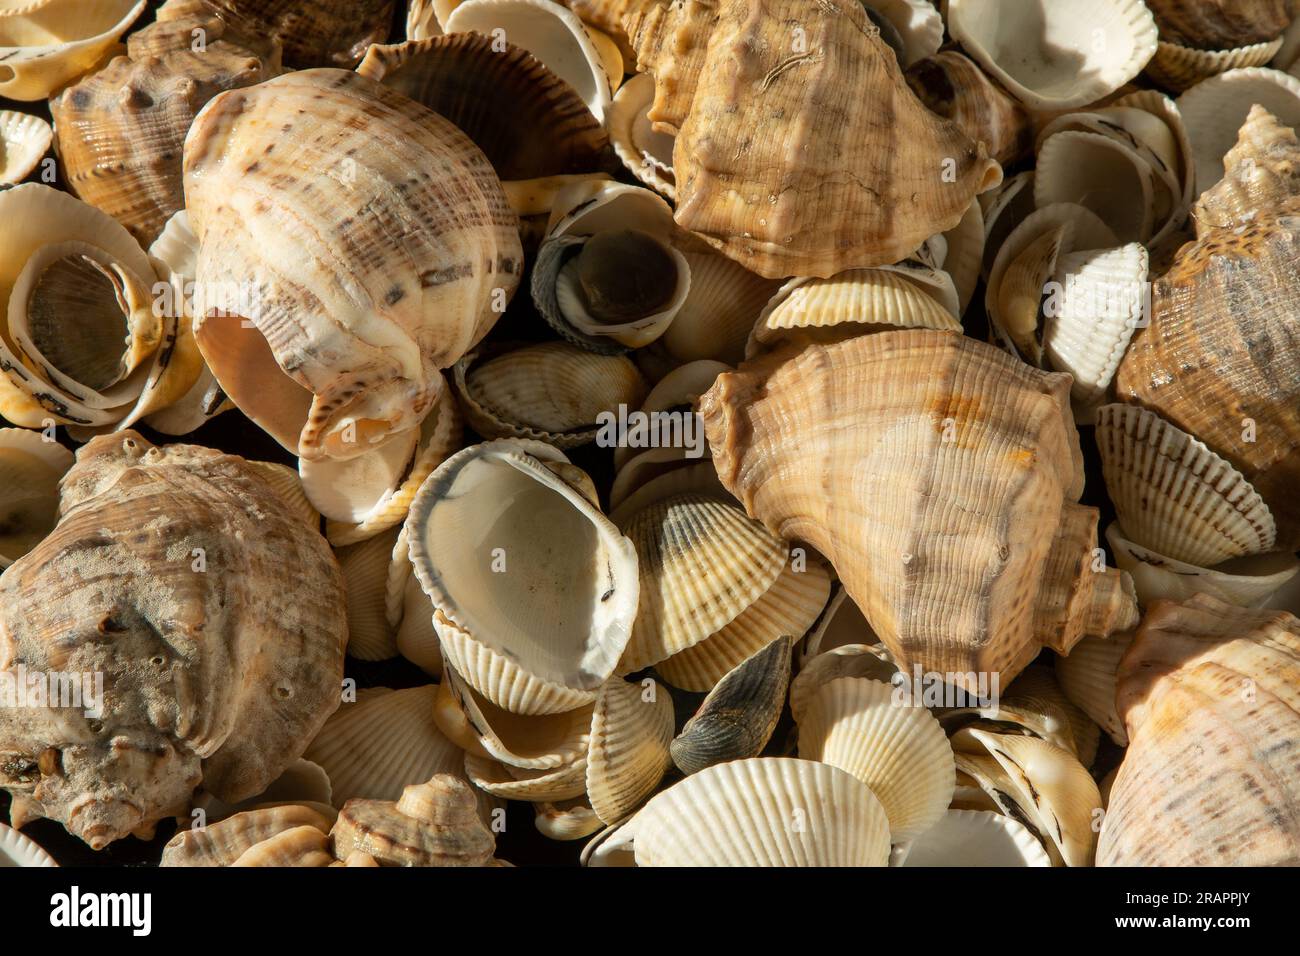 Sea shells on the beach. Summer background. Rapan shell top view. Beige light color. Aesthetic minimalism. Nature beauty. Mixed multi colorful seashells. Seashell different set. Stock Photo